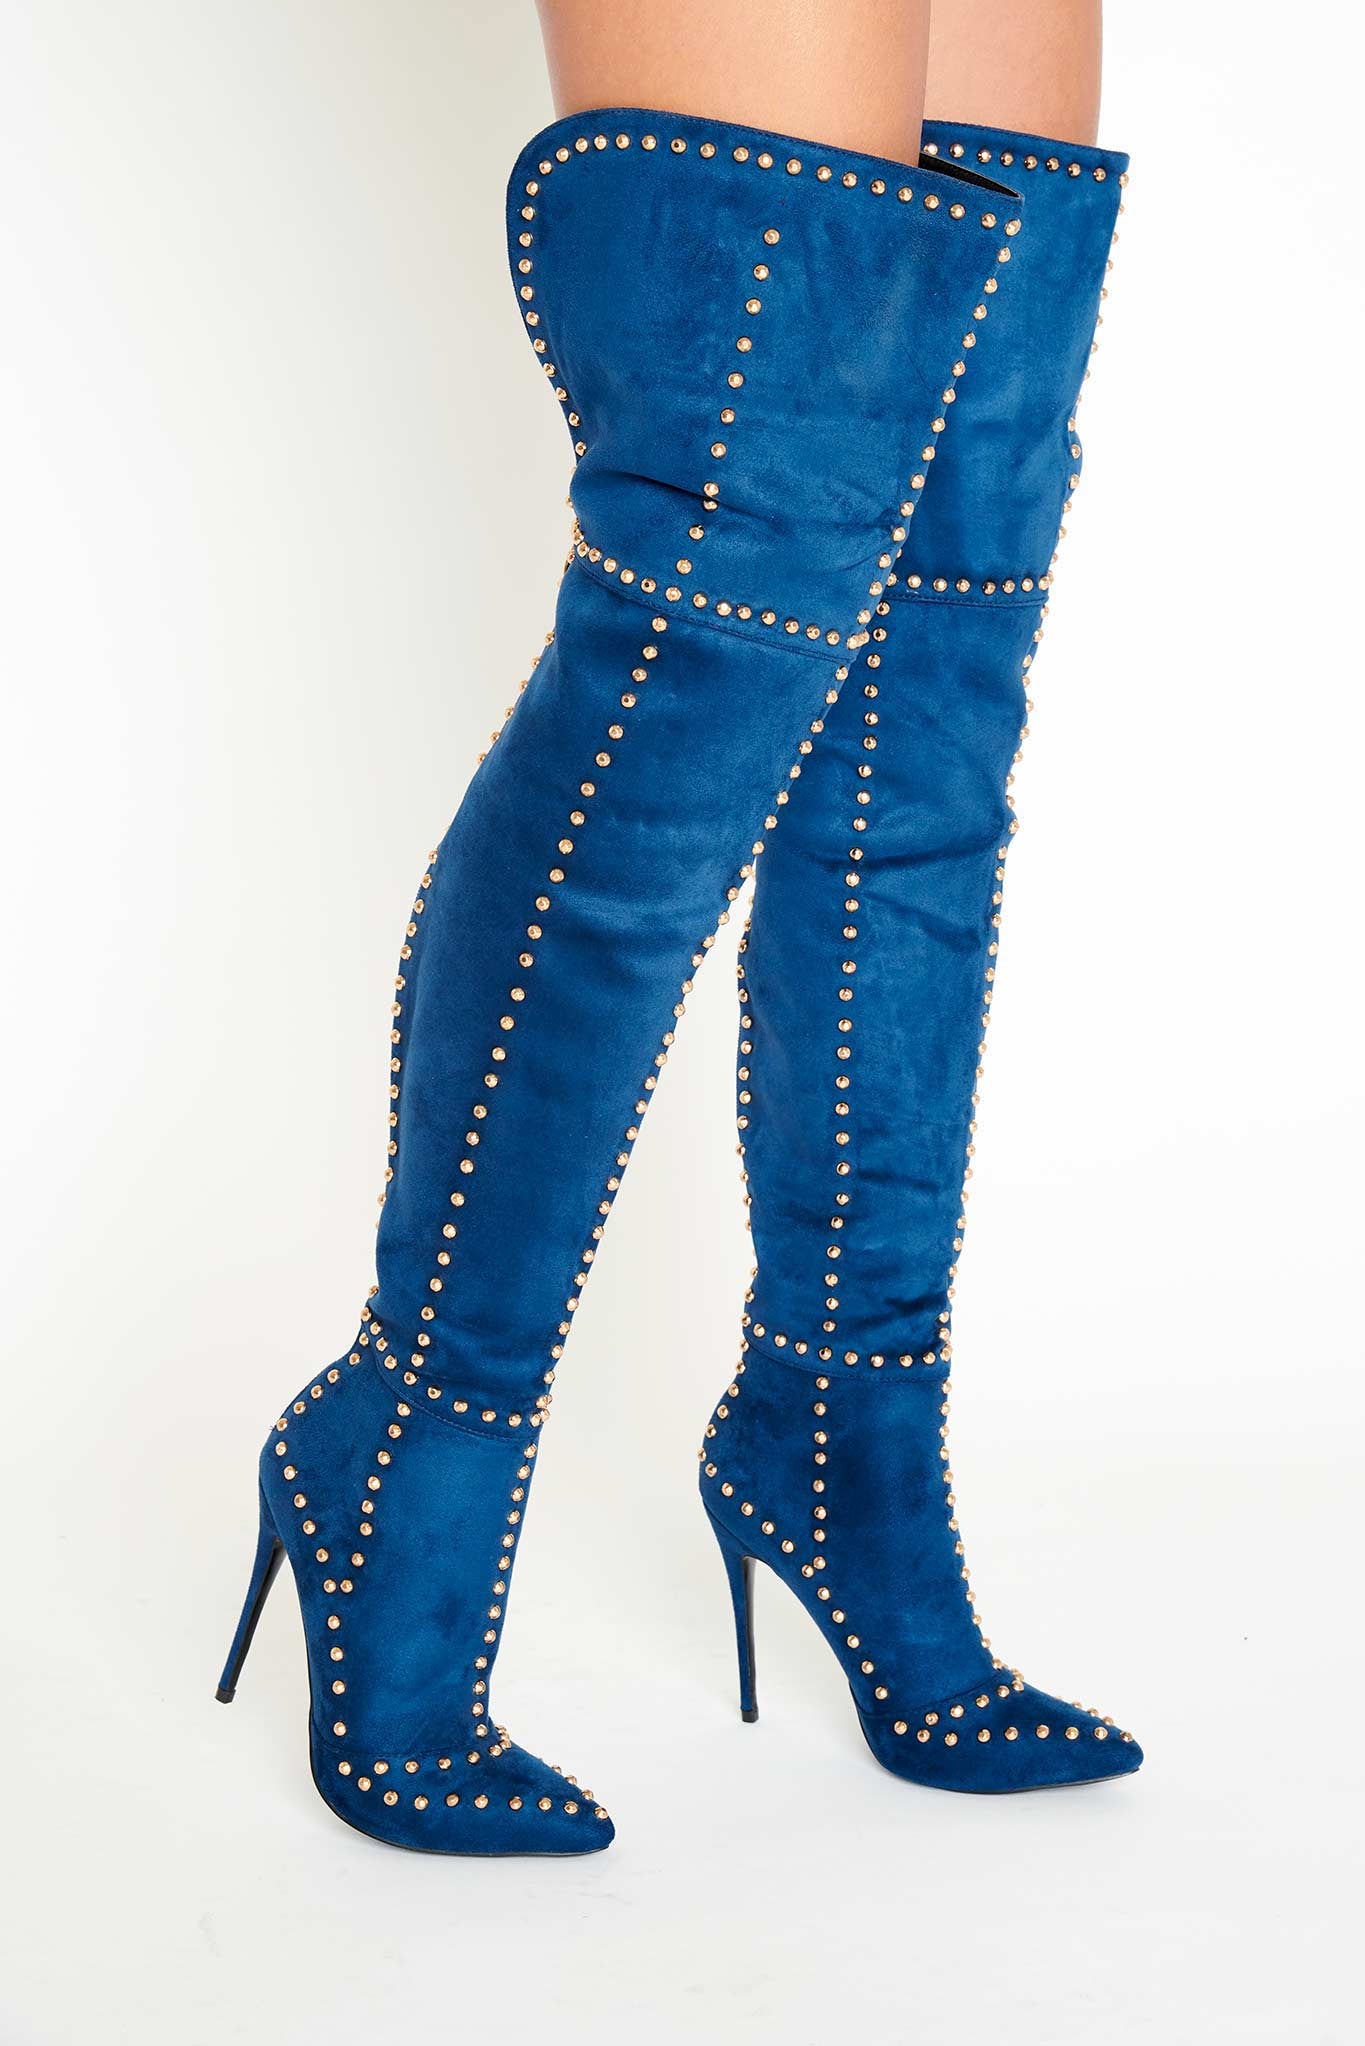 Jada Studded Thigh High Boots in Royal 